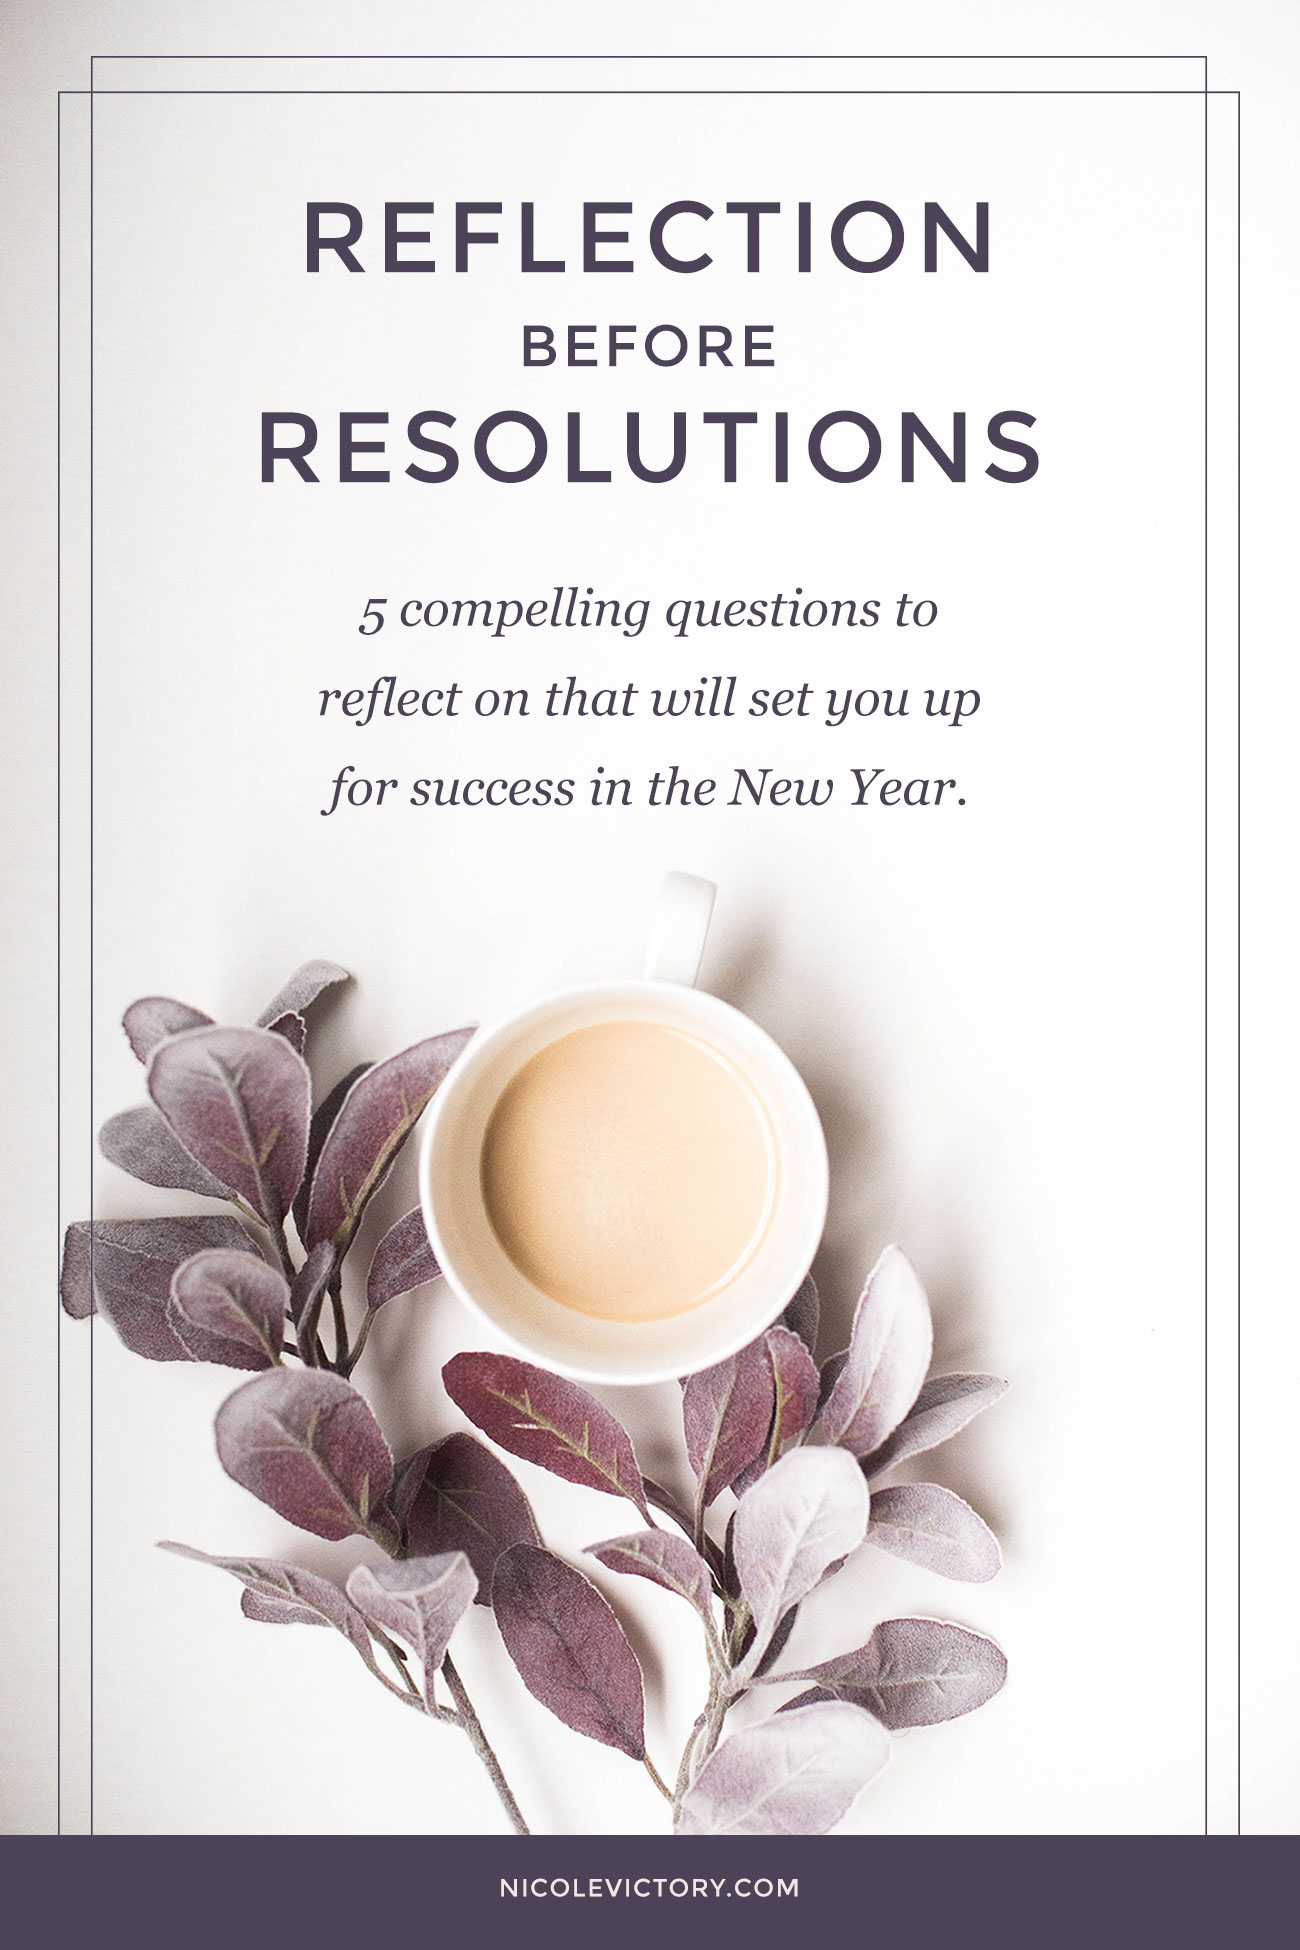 Reflection Before Resolutions: 5 compelling questions to reflect on that will set you up for success in the New Year.Business Up for Success in the New Year | Nicole Victory Design